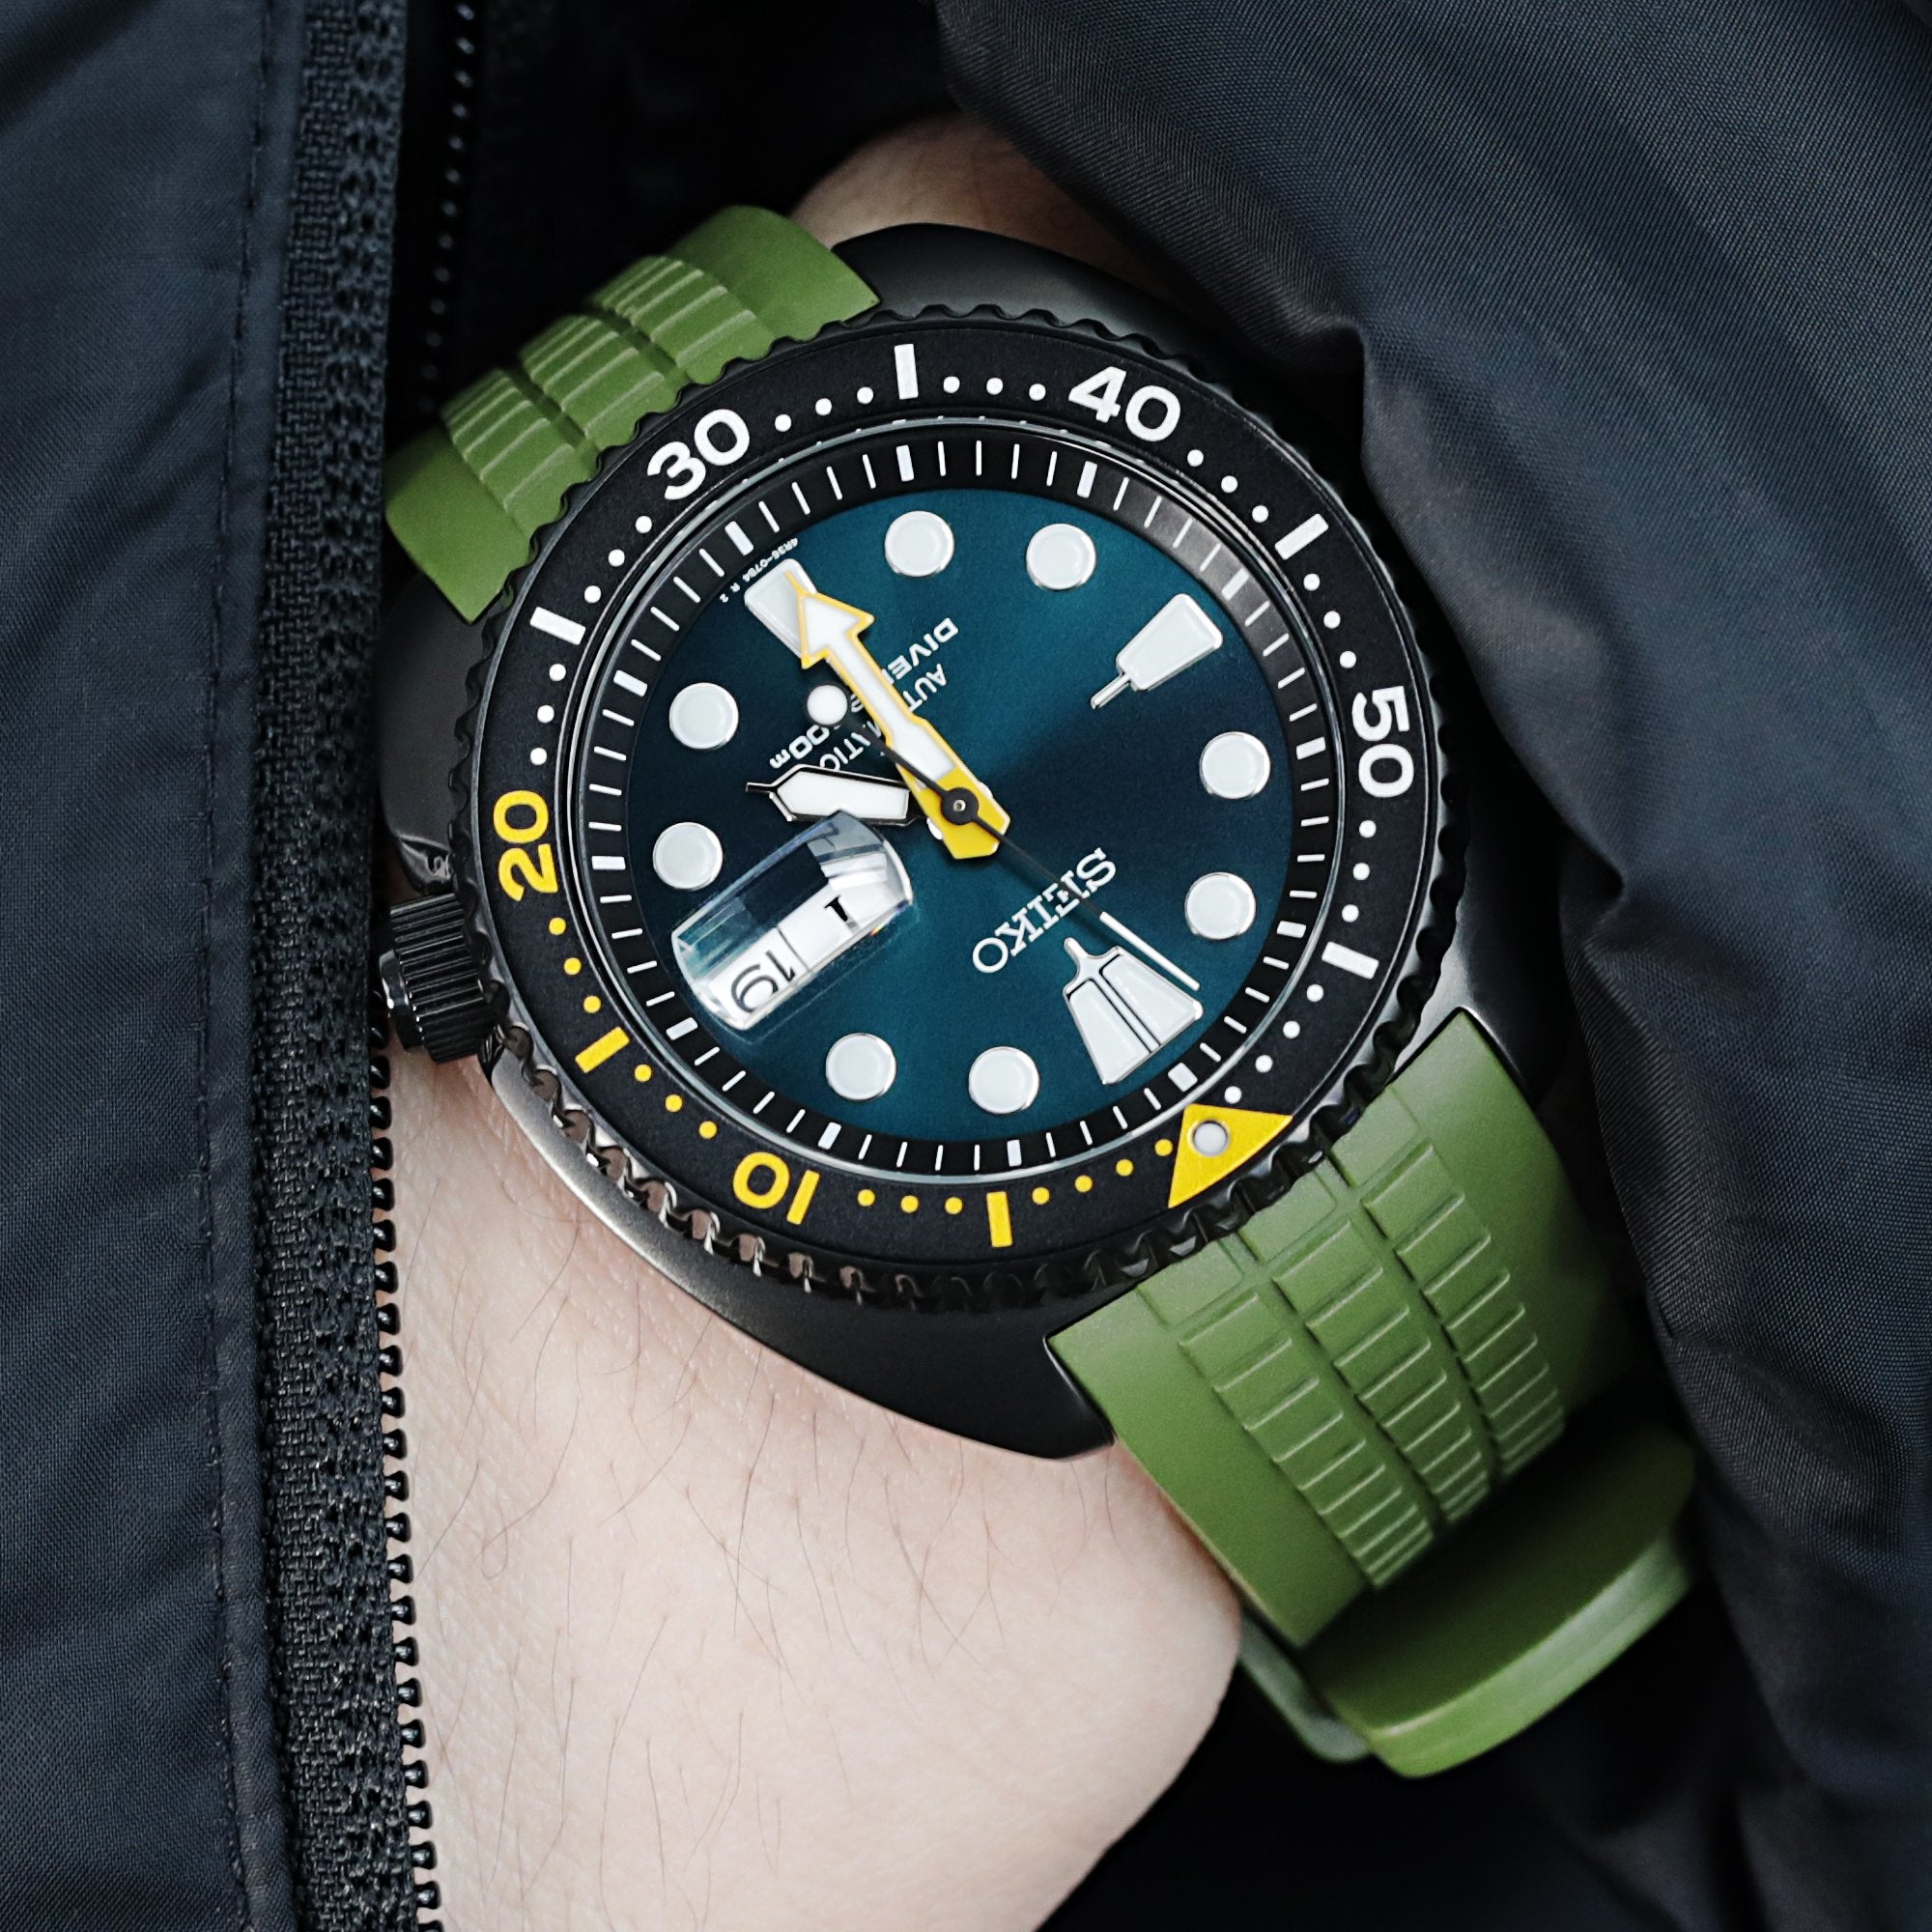 Crafter Blue CB12 Rubber strap is engineered for Seiko Turtle Prospex Watch SRP773, SRP775, SRP777, SRP779 models